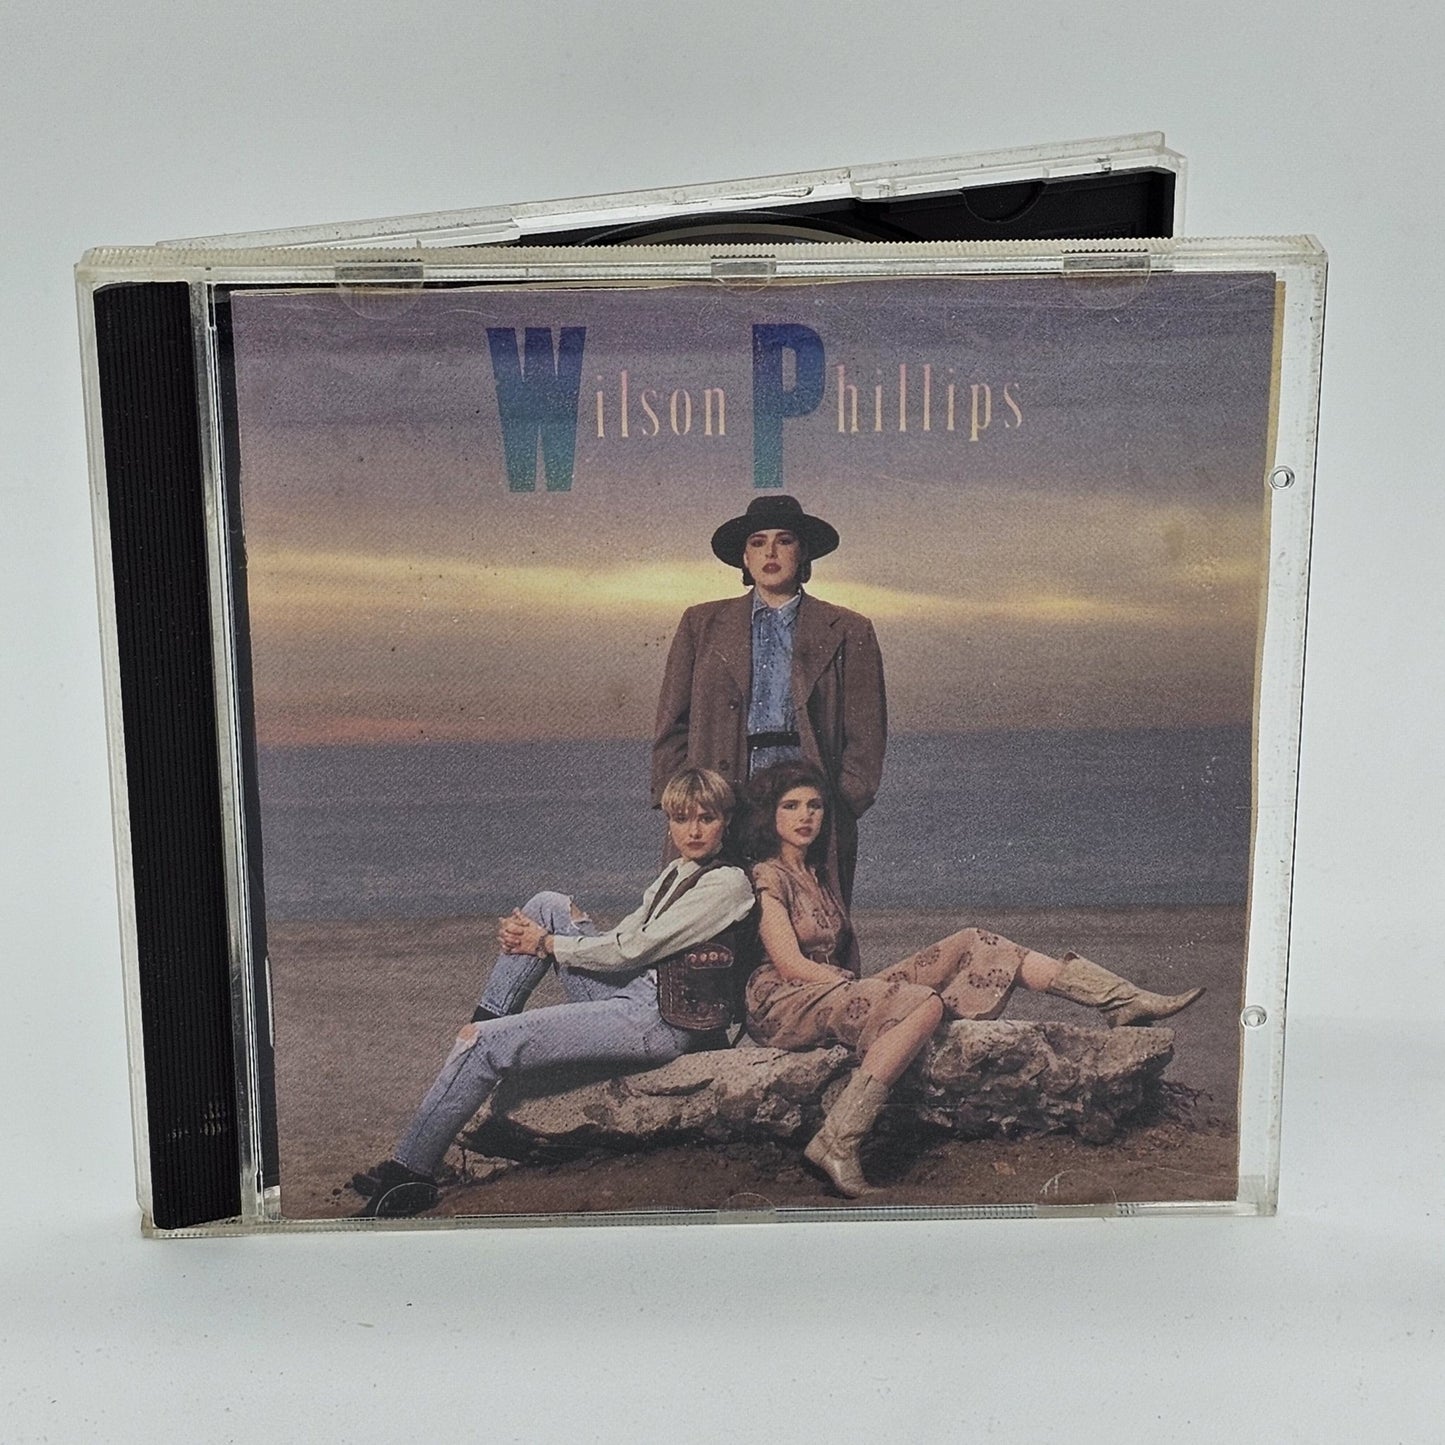 SBK Records - Wilson Phillips | Wilson Phillips | CD - Compact Disc - Steady Bunny Shop